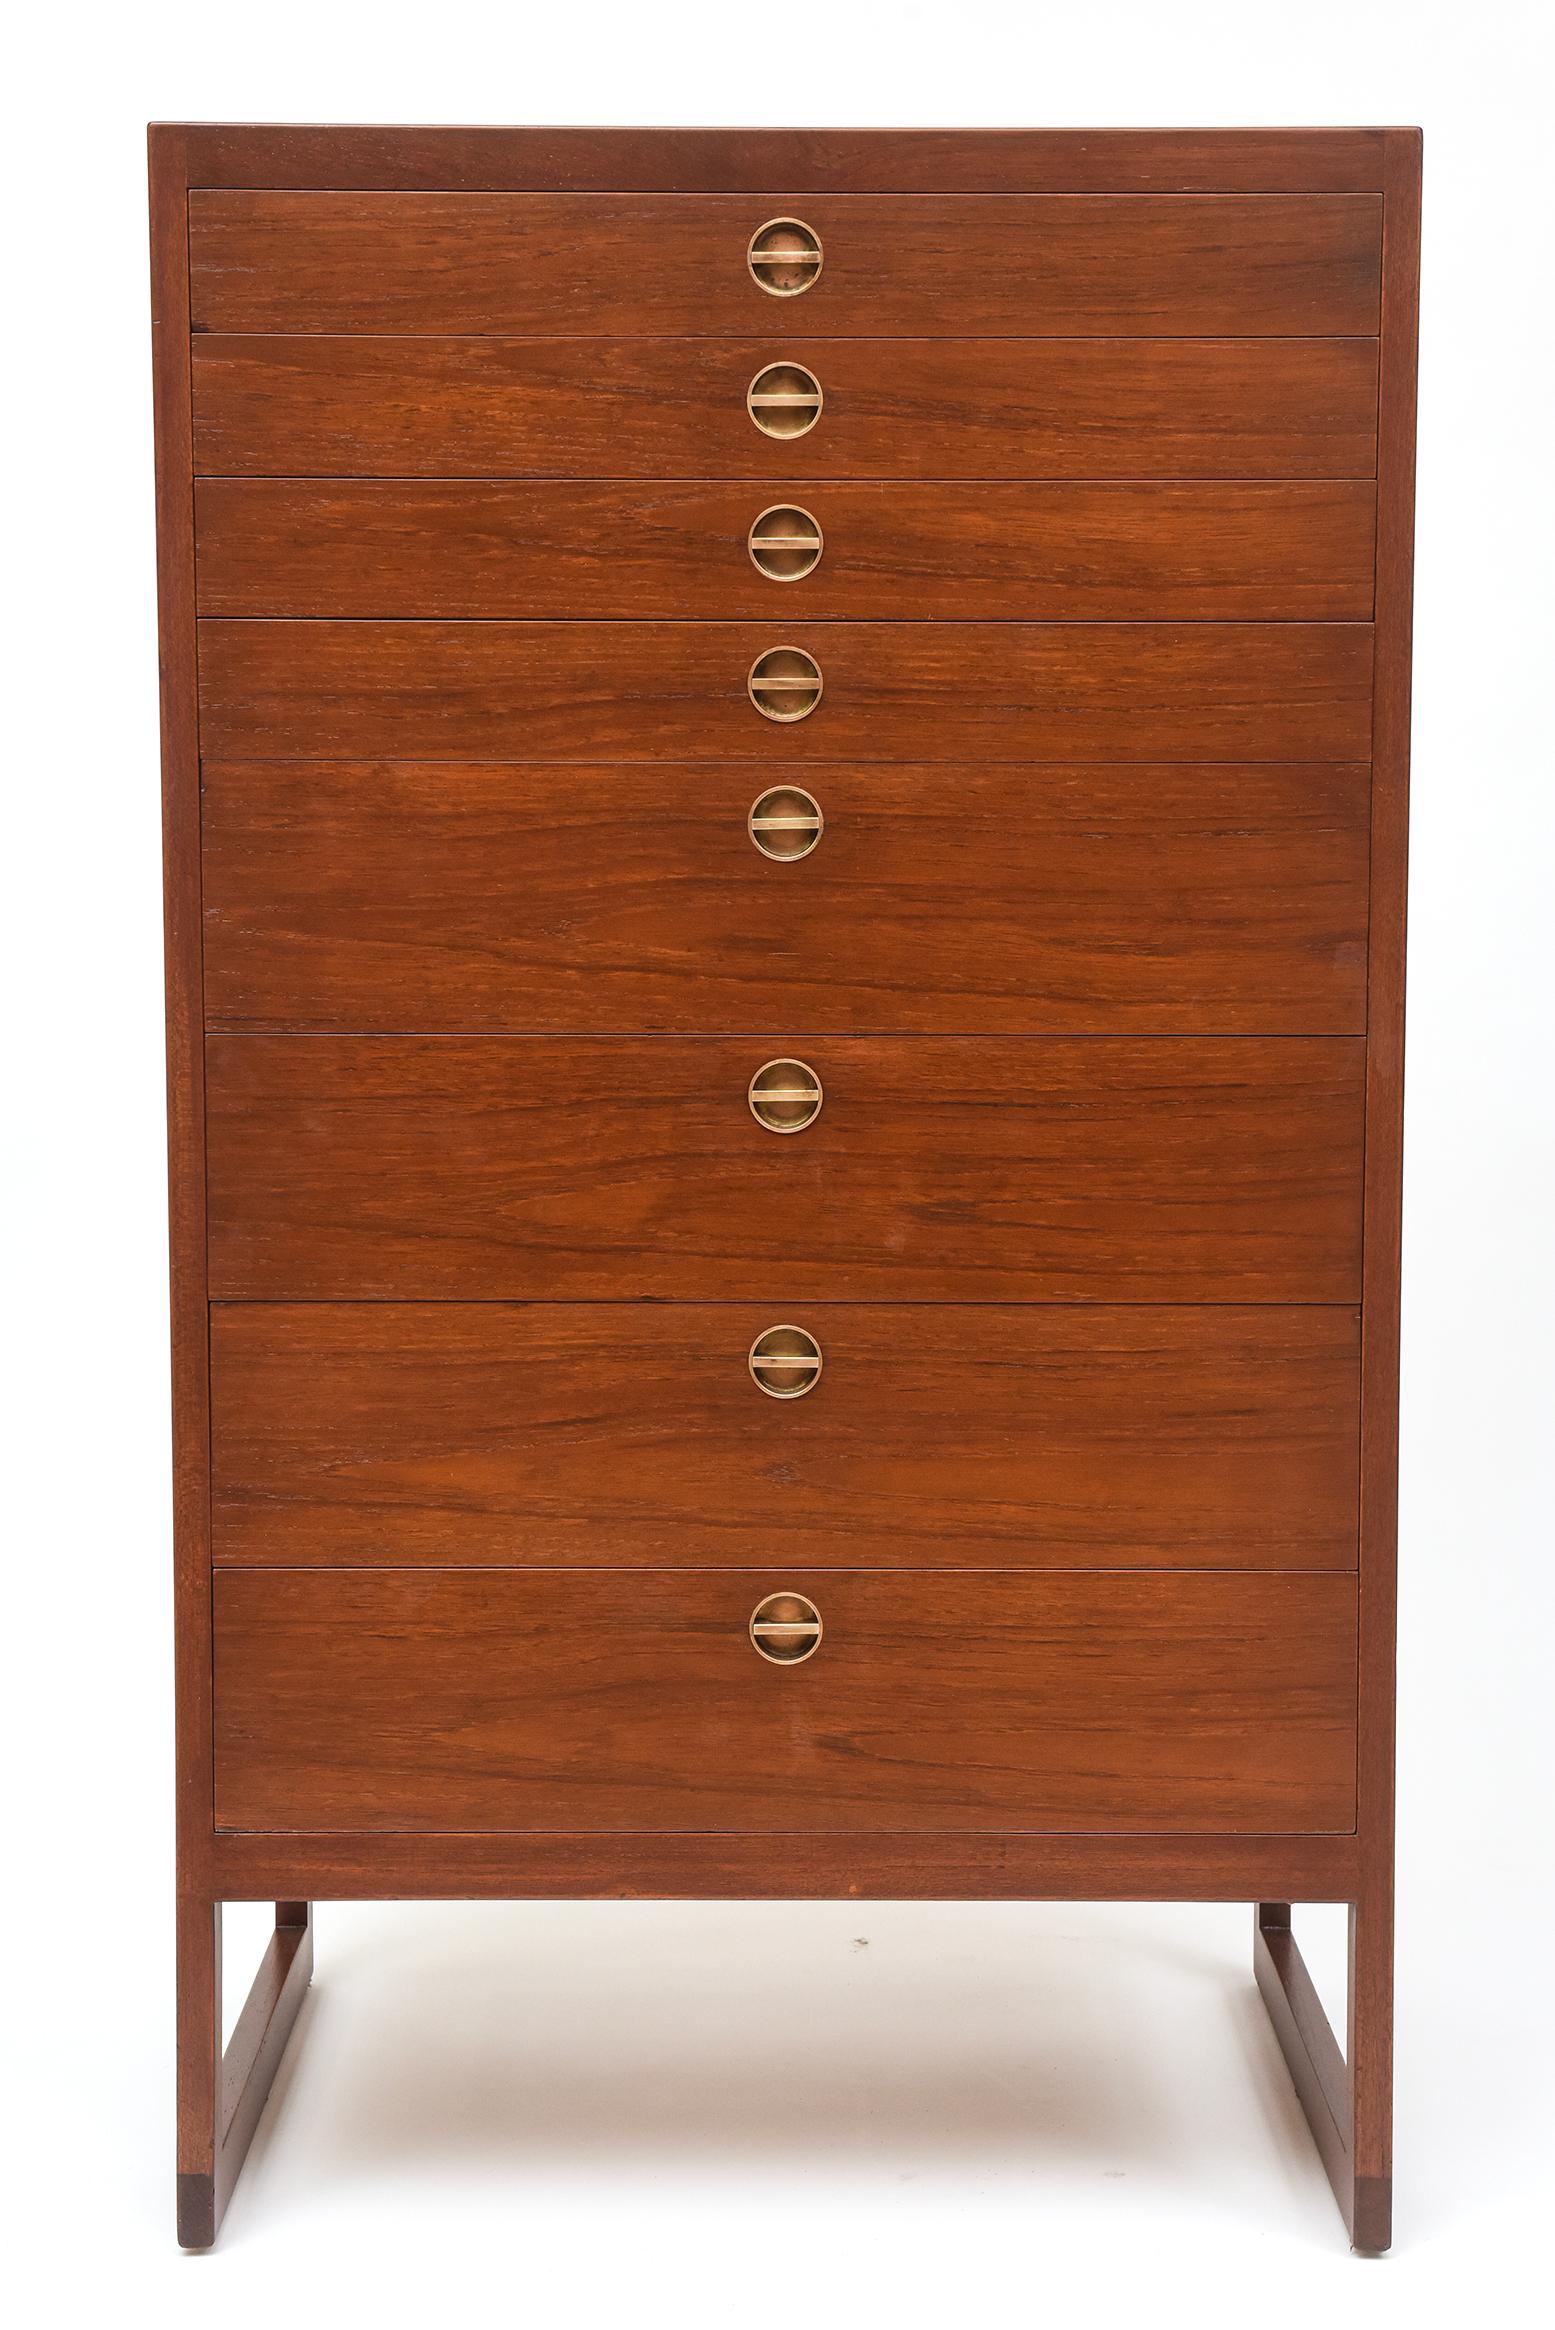 Teak Tall Chest of Drawers, Model BM64 by Børge Mogensen, C. 1960- Two Available For Sale 1